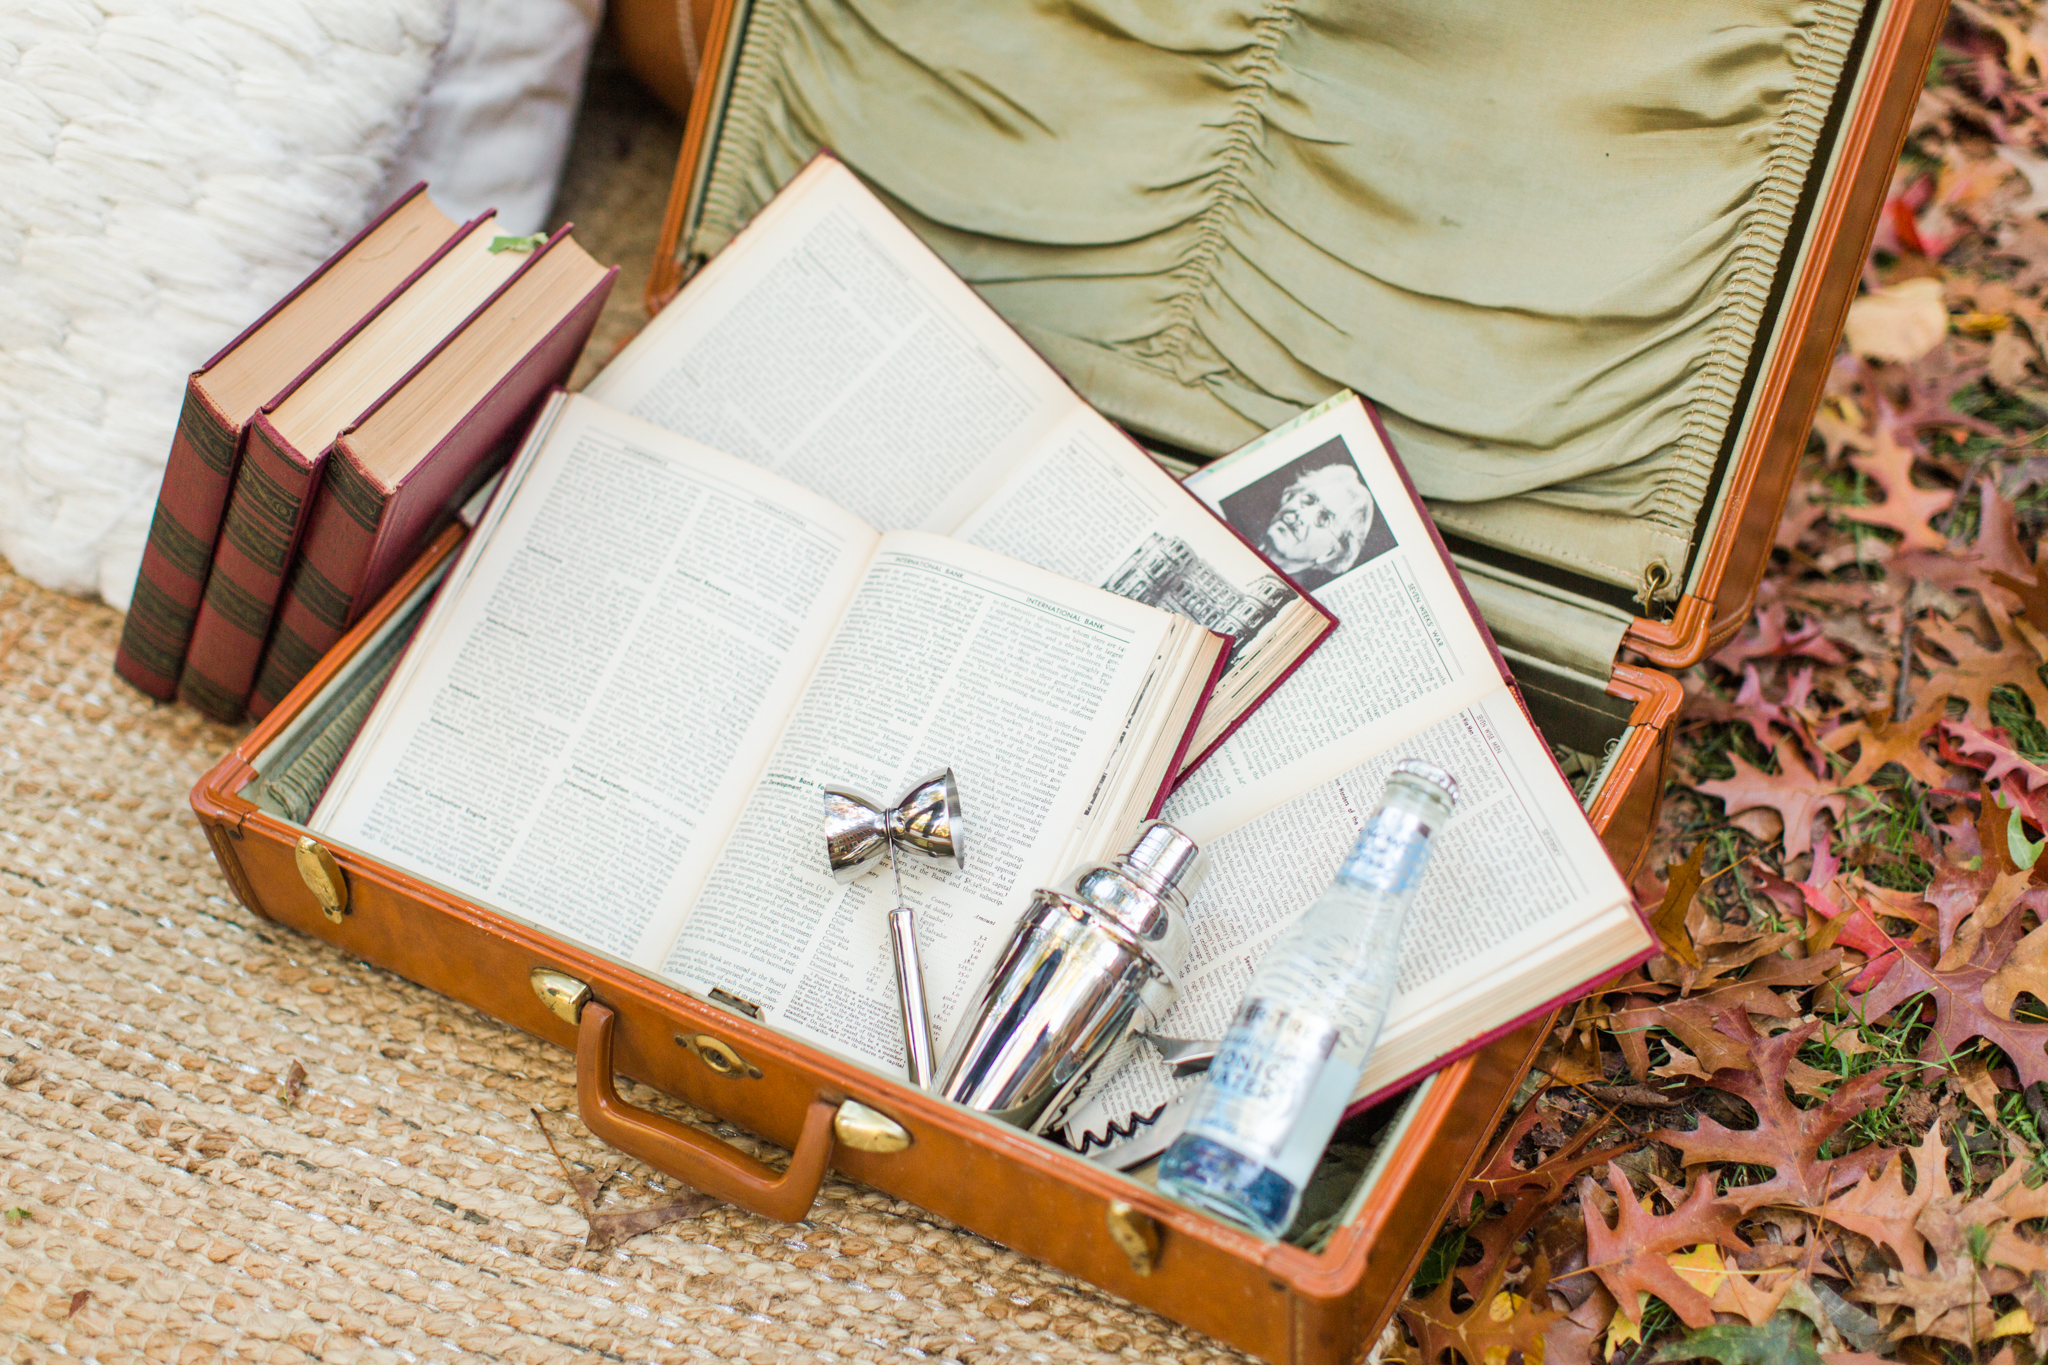 Vintage wedding details and vintage suitcase with bar set up. Pearl Weddings & Events